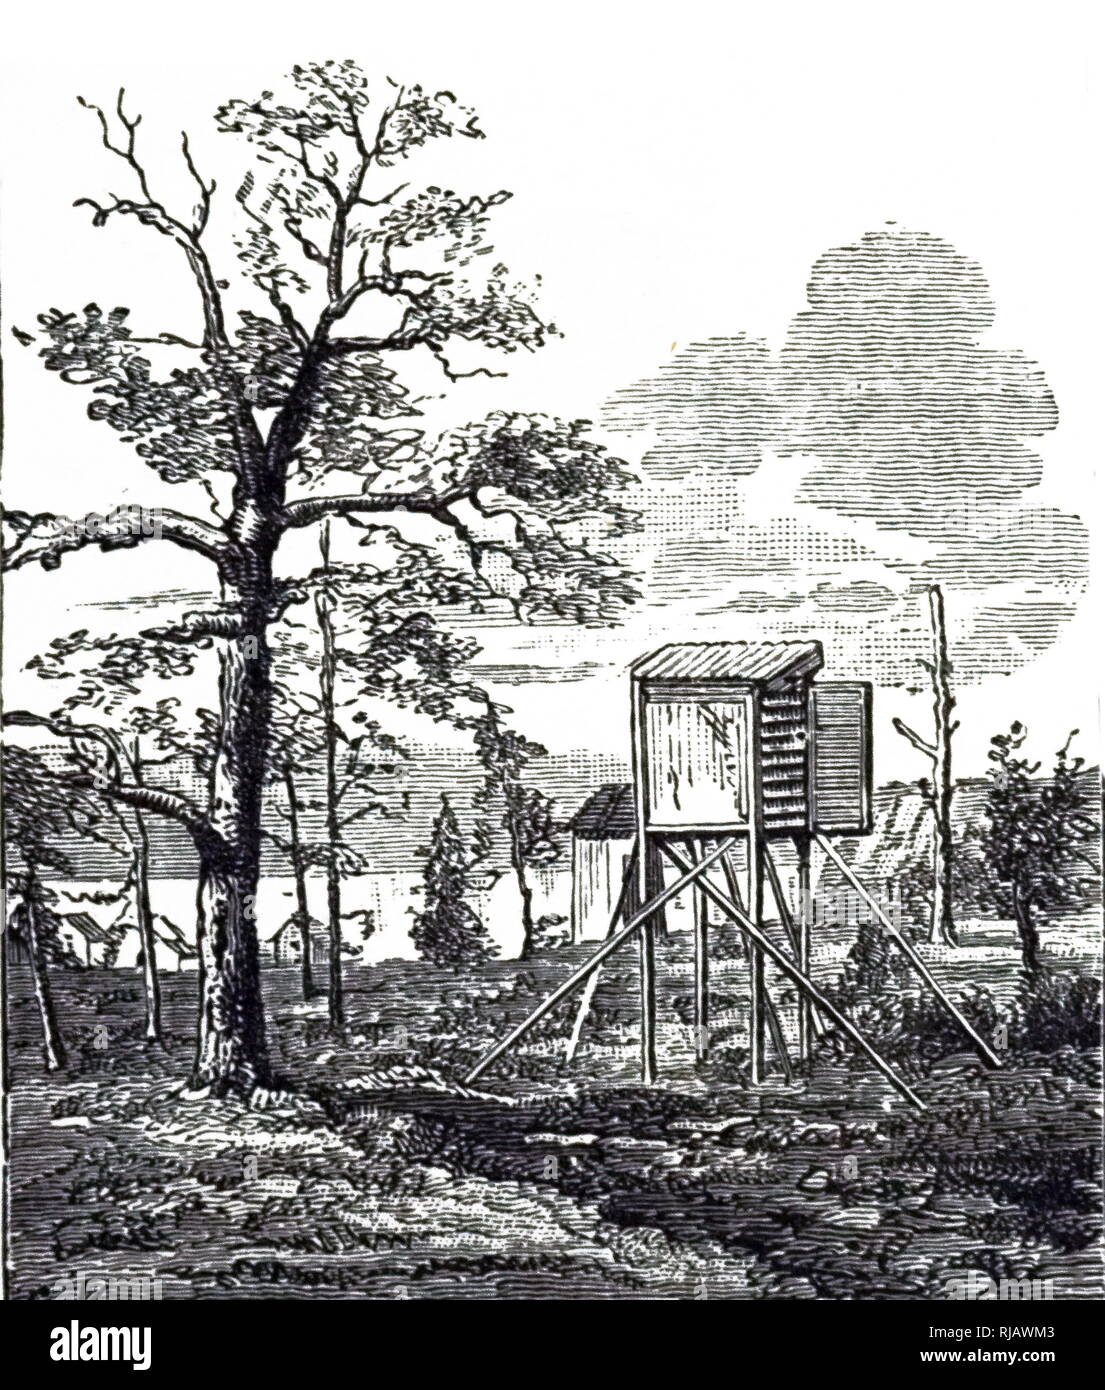 An engraving depicting a Norwegian observing station at Bossekep, used for astronomical, meteorological and geomagnetic research during the International Polar Year 1882/3. Dated 19th century Stock Photo